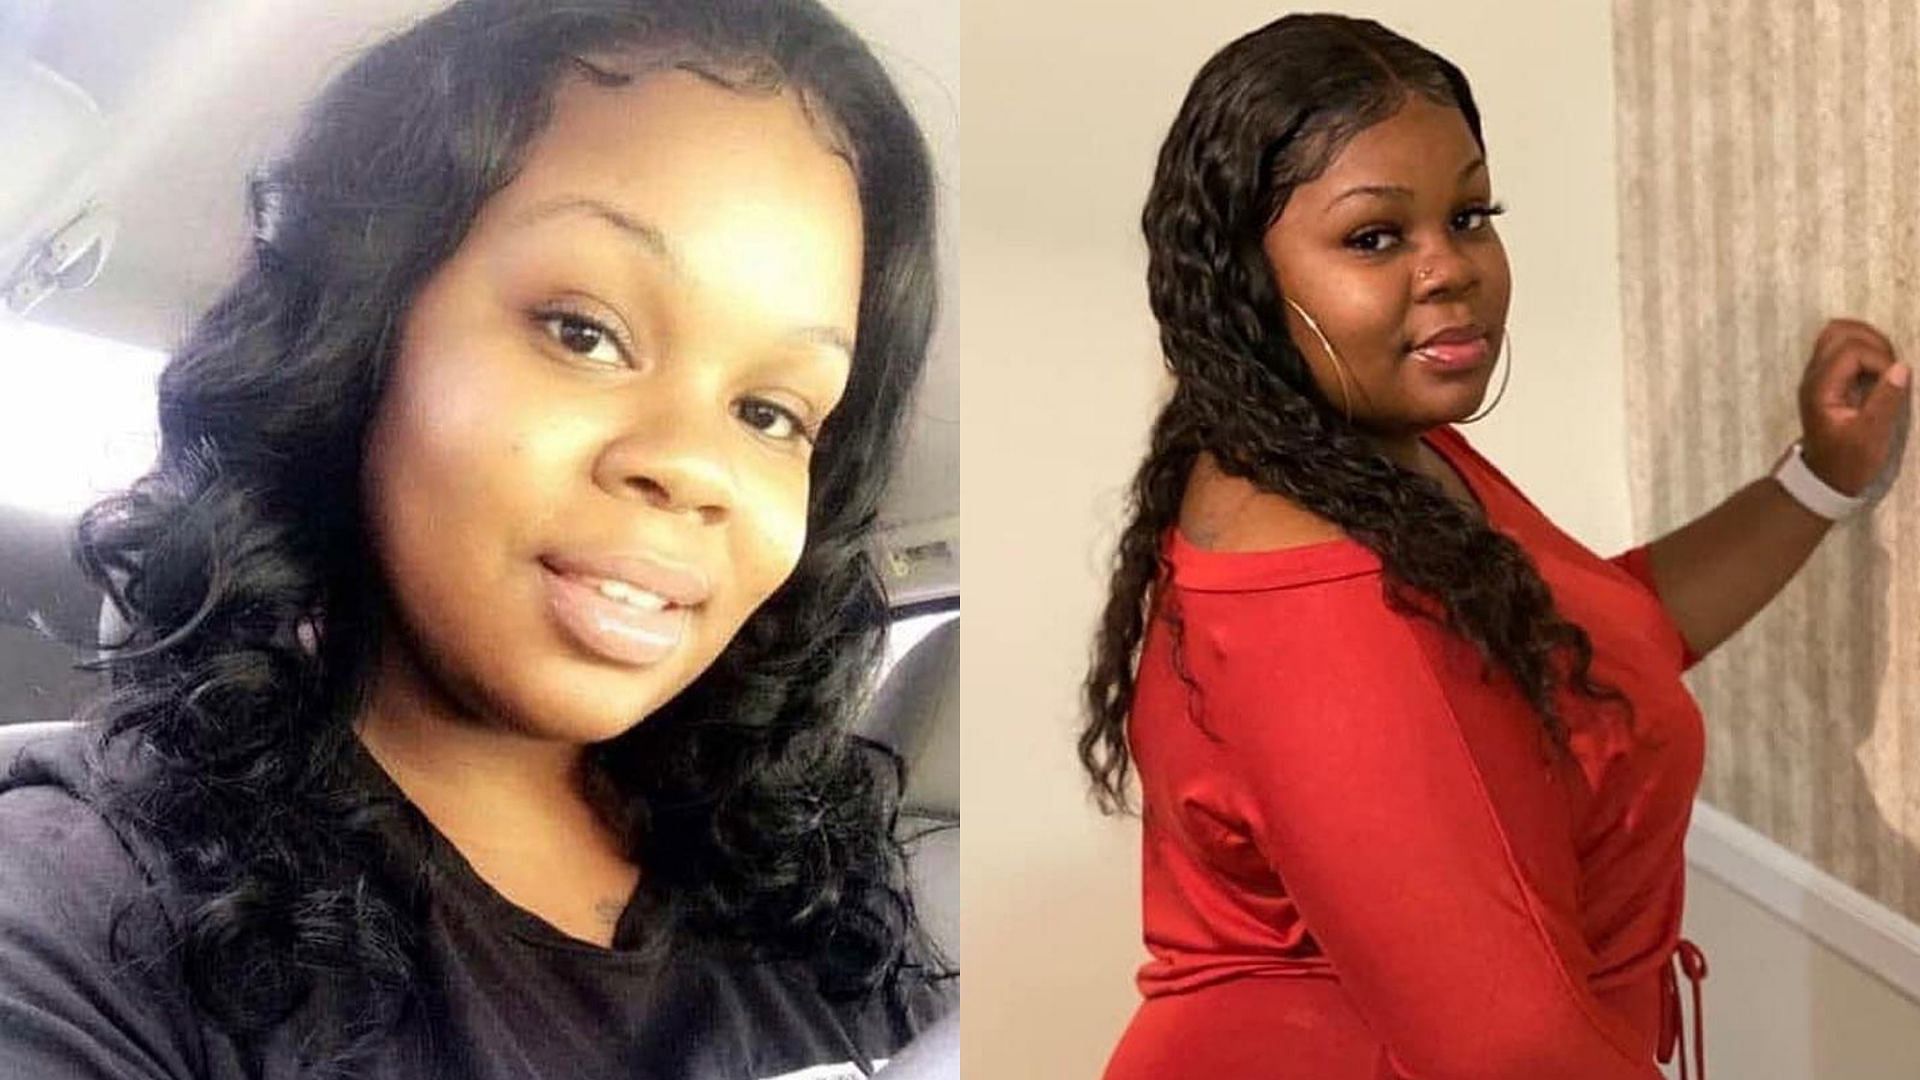 Breonna Taylor was fatally shot on March 13, 2020. (Image via Instagram/taylorinitiative)